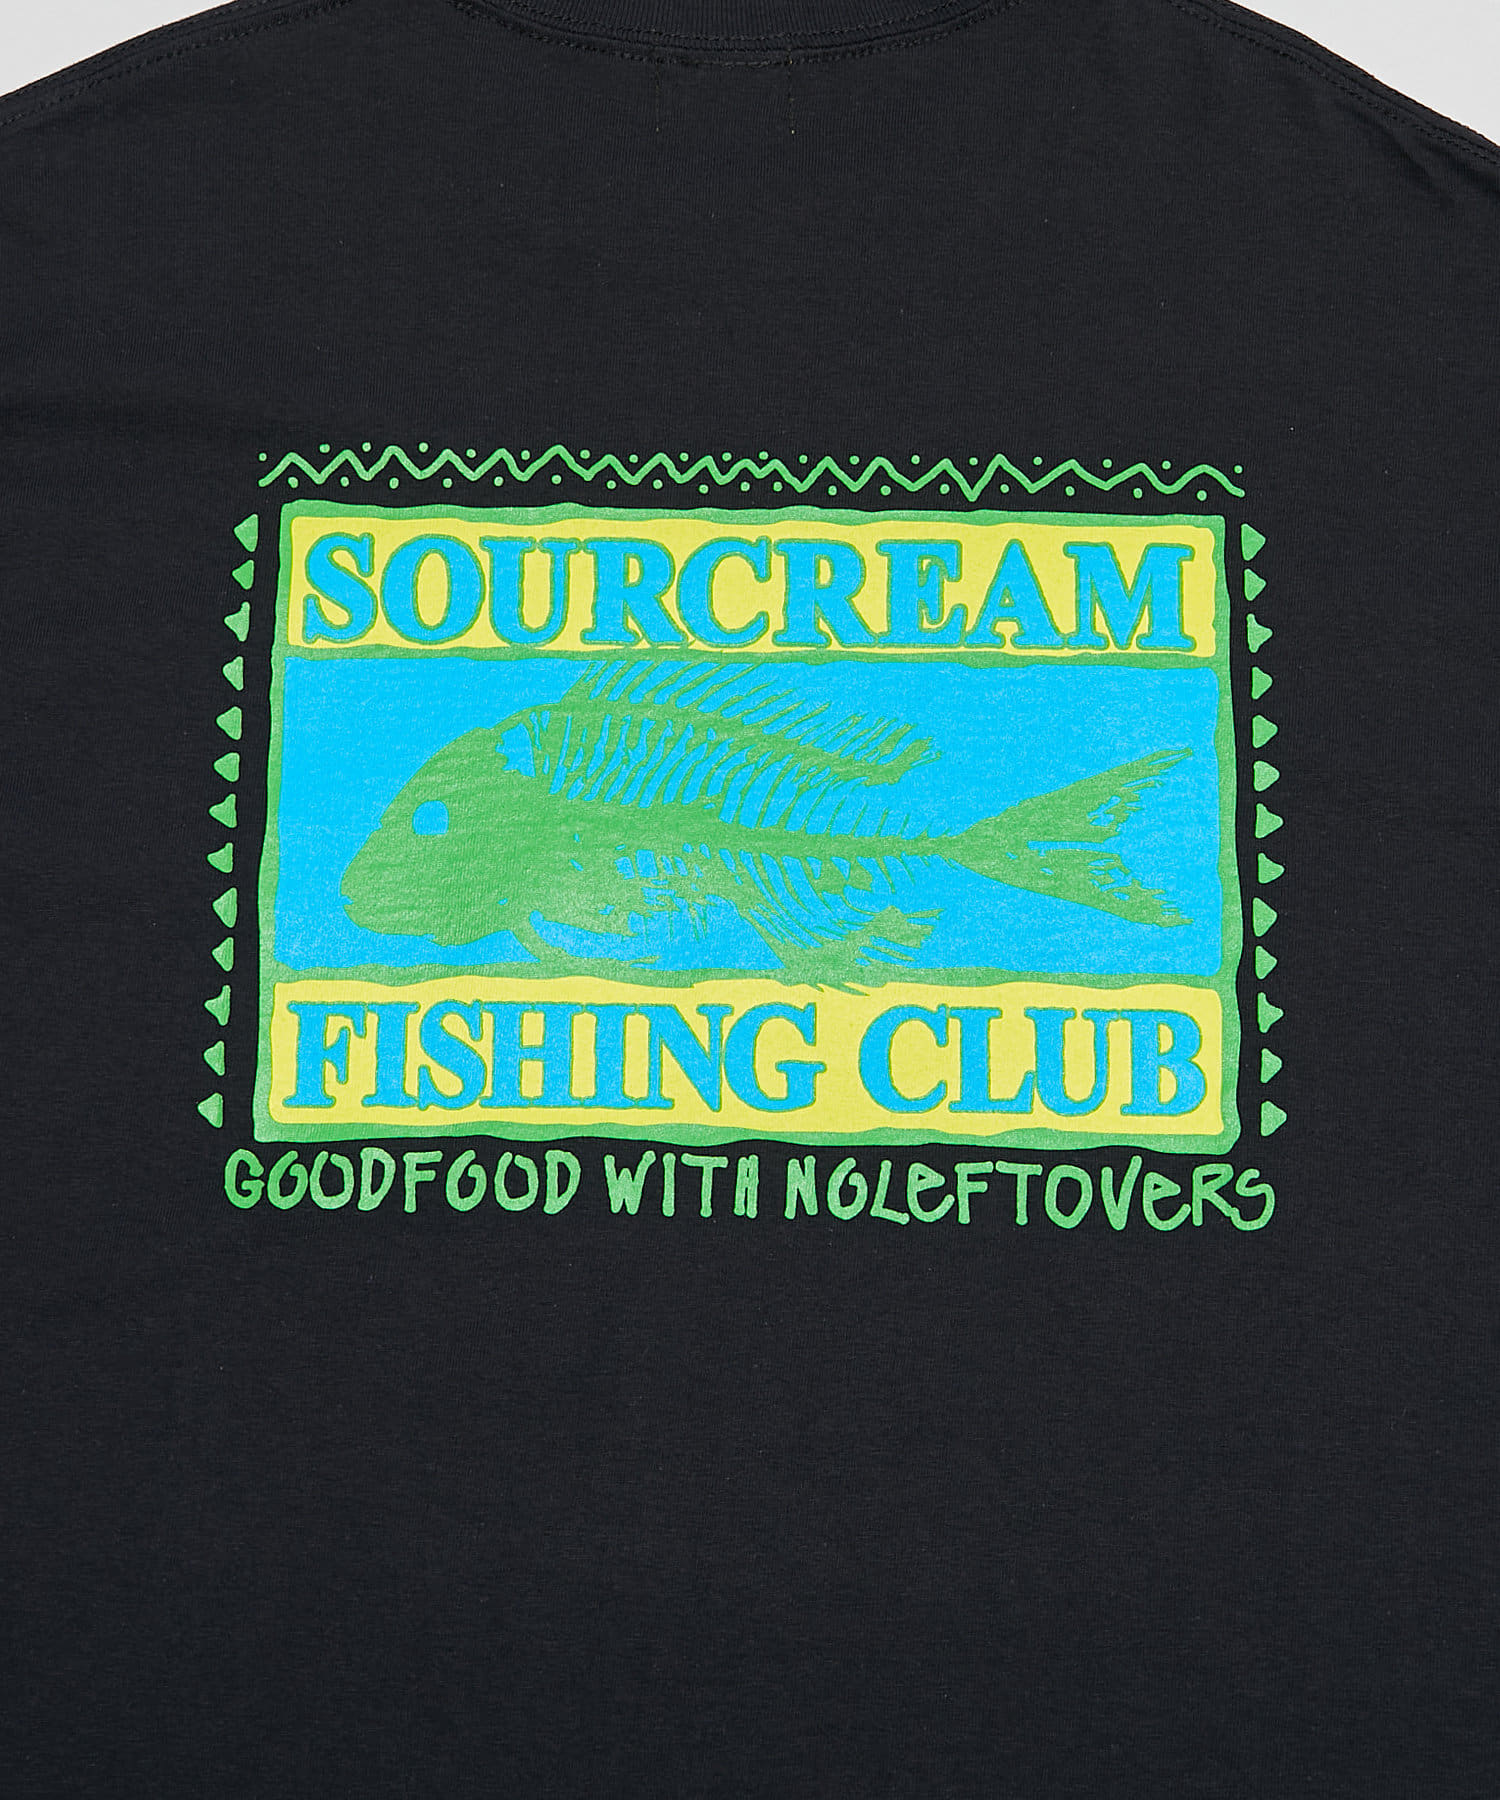 WHO’S WHO gallery(フーズフーギャラリー) 【Sourcream/サワークリーム）FISH right thing